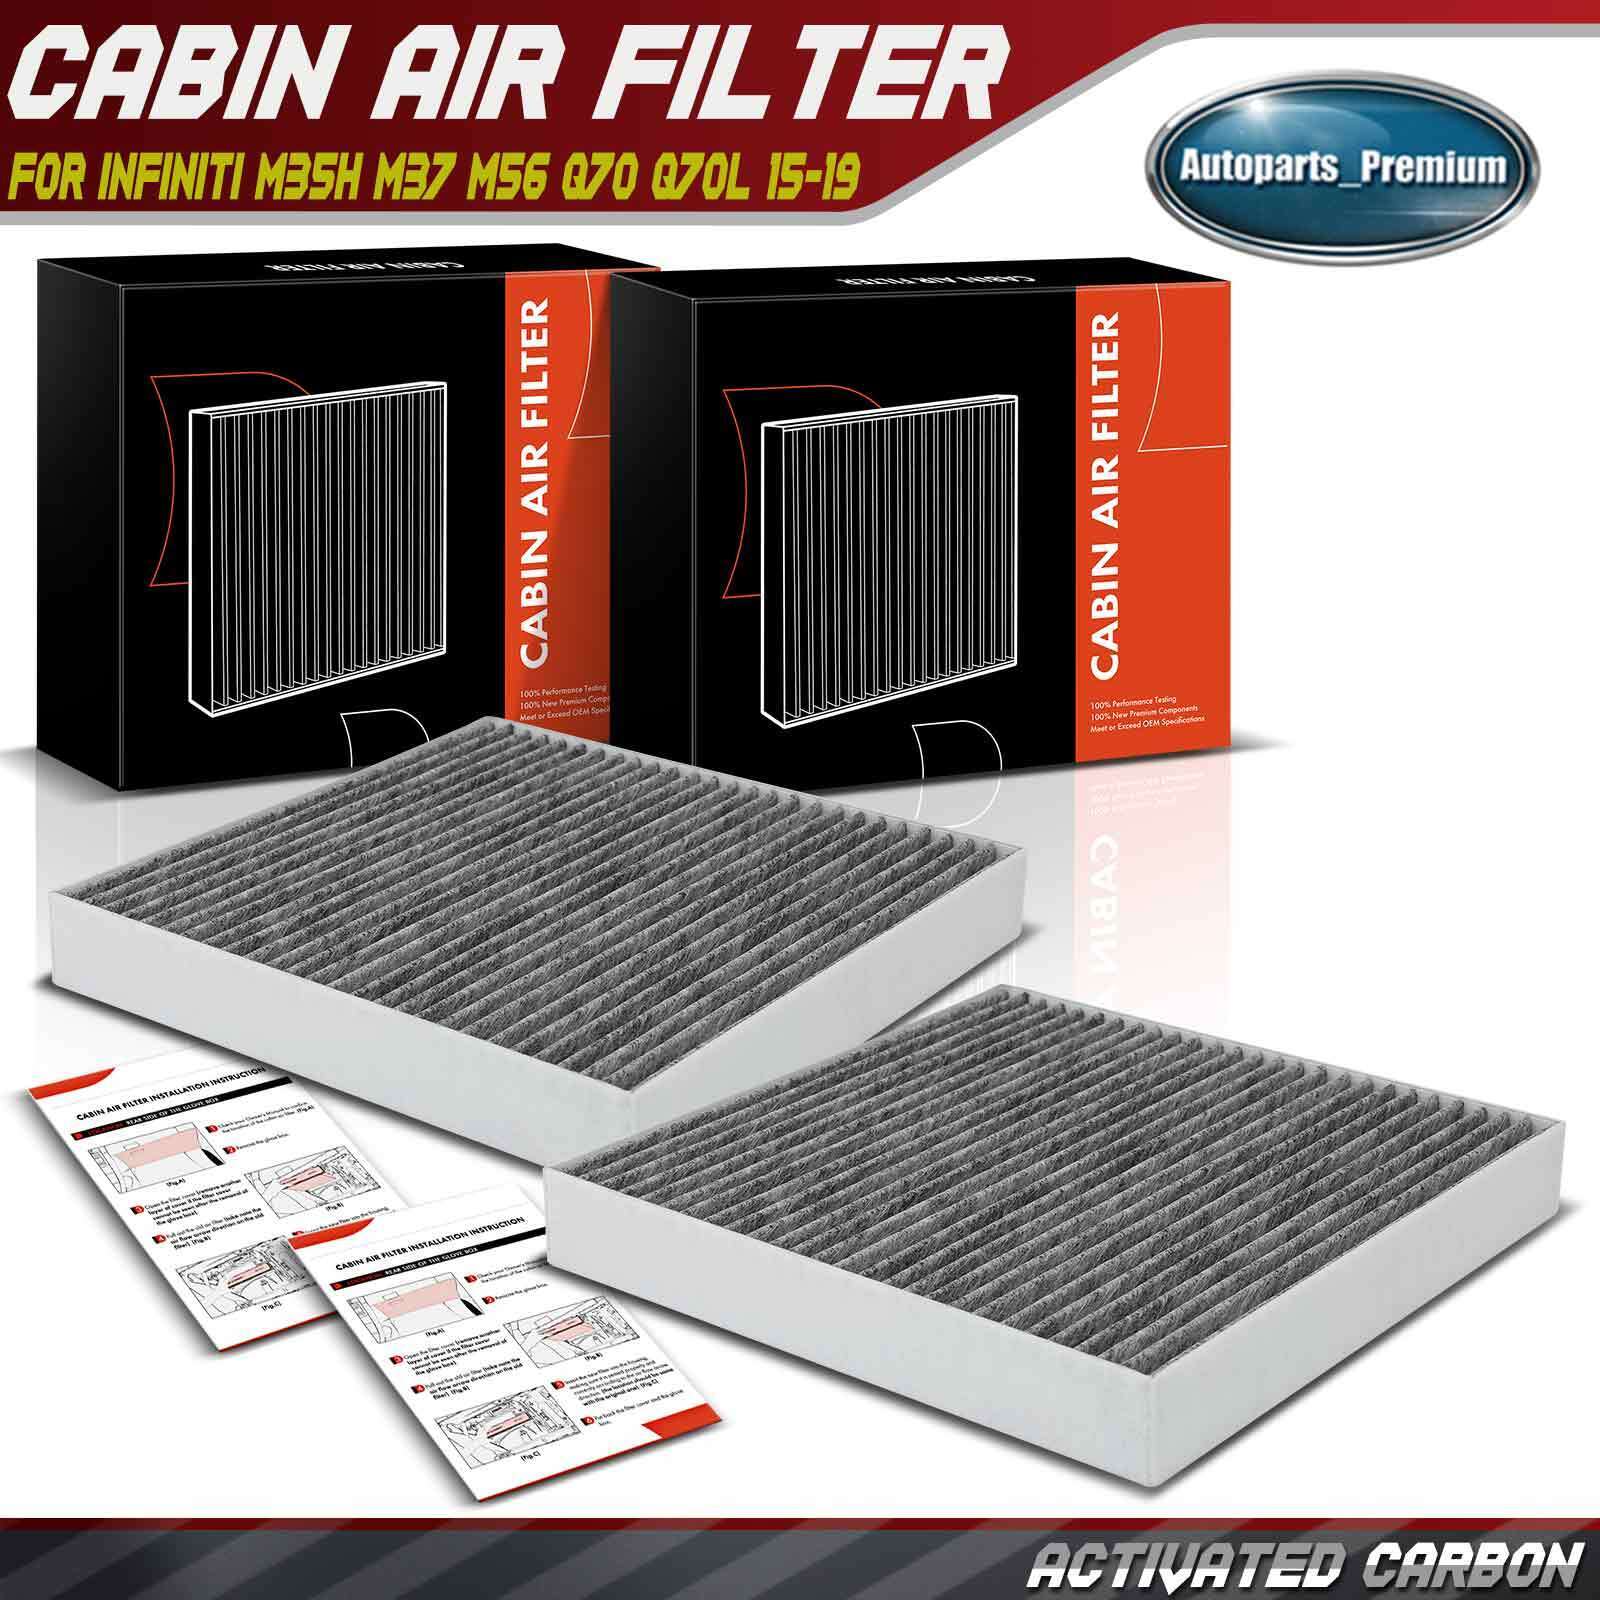 2xActivated Carbon Cabin Air Filter for INFINITI M35h M37 M56 Q70 Q70L 2015-2019